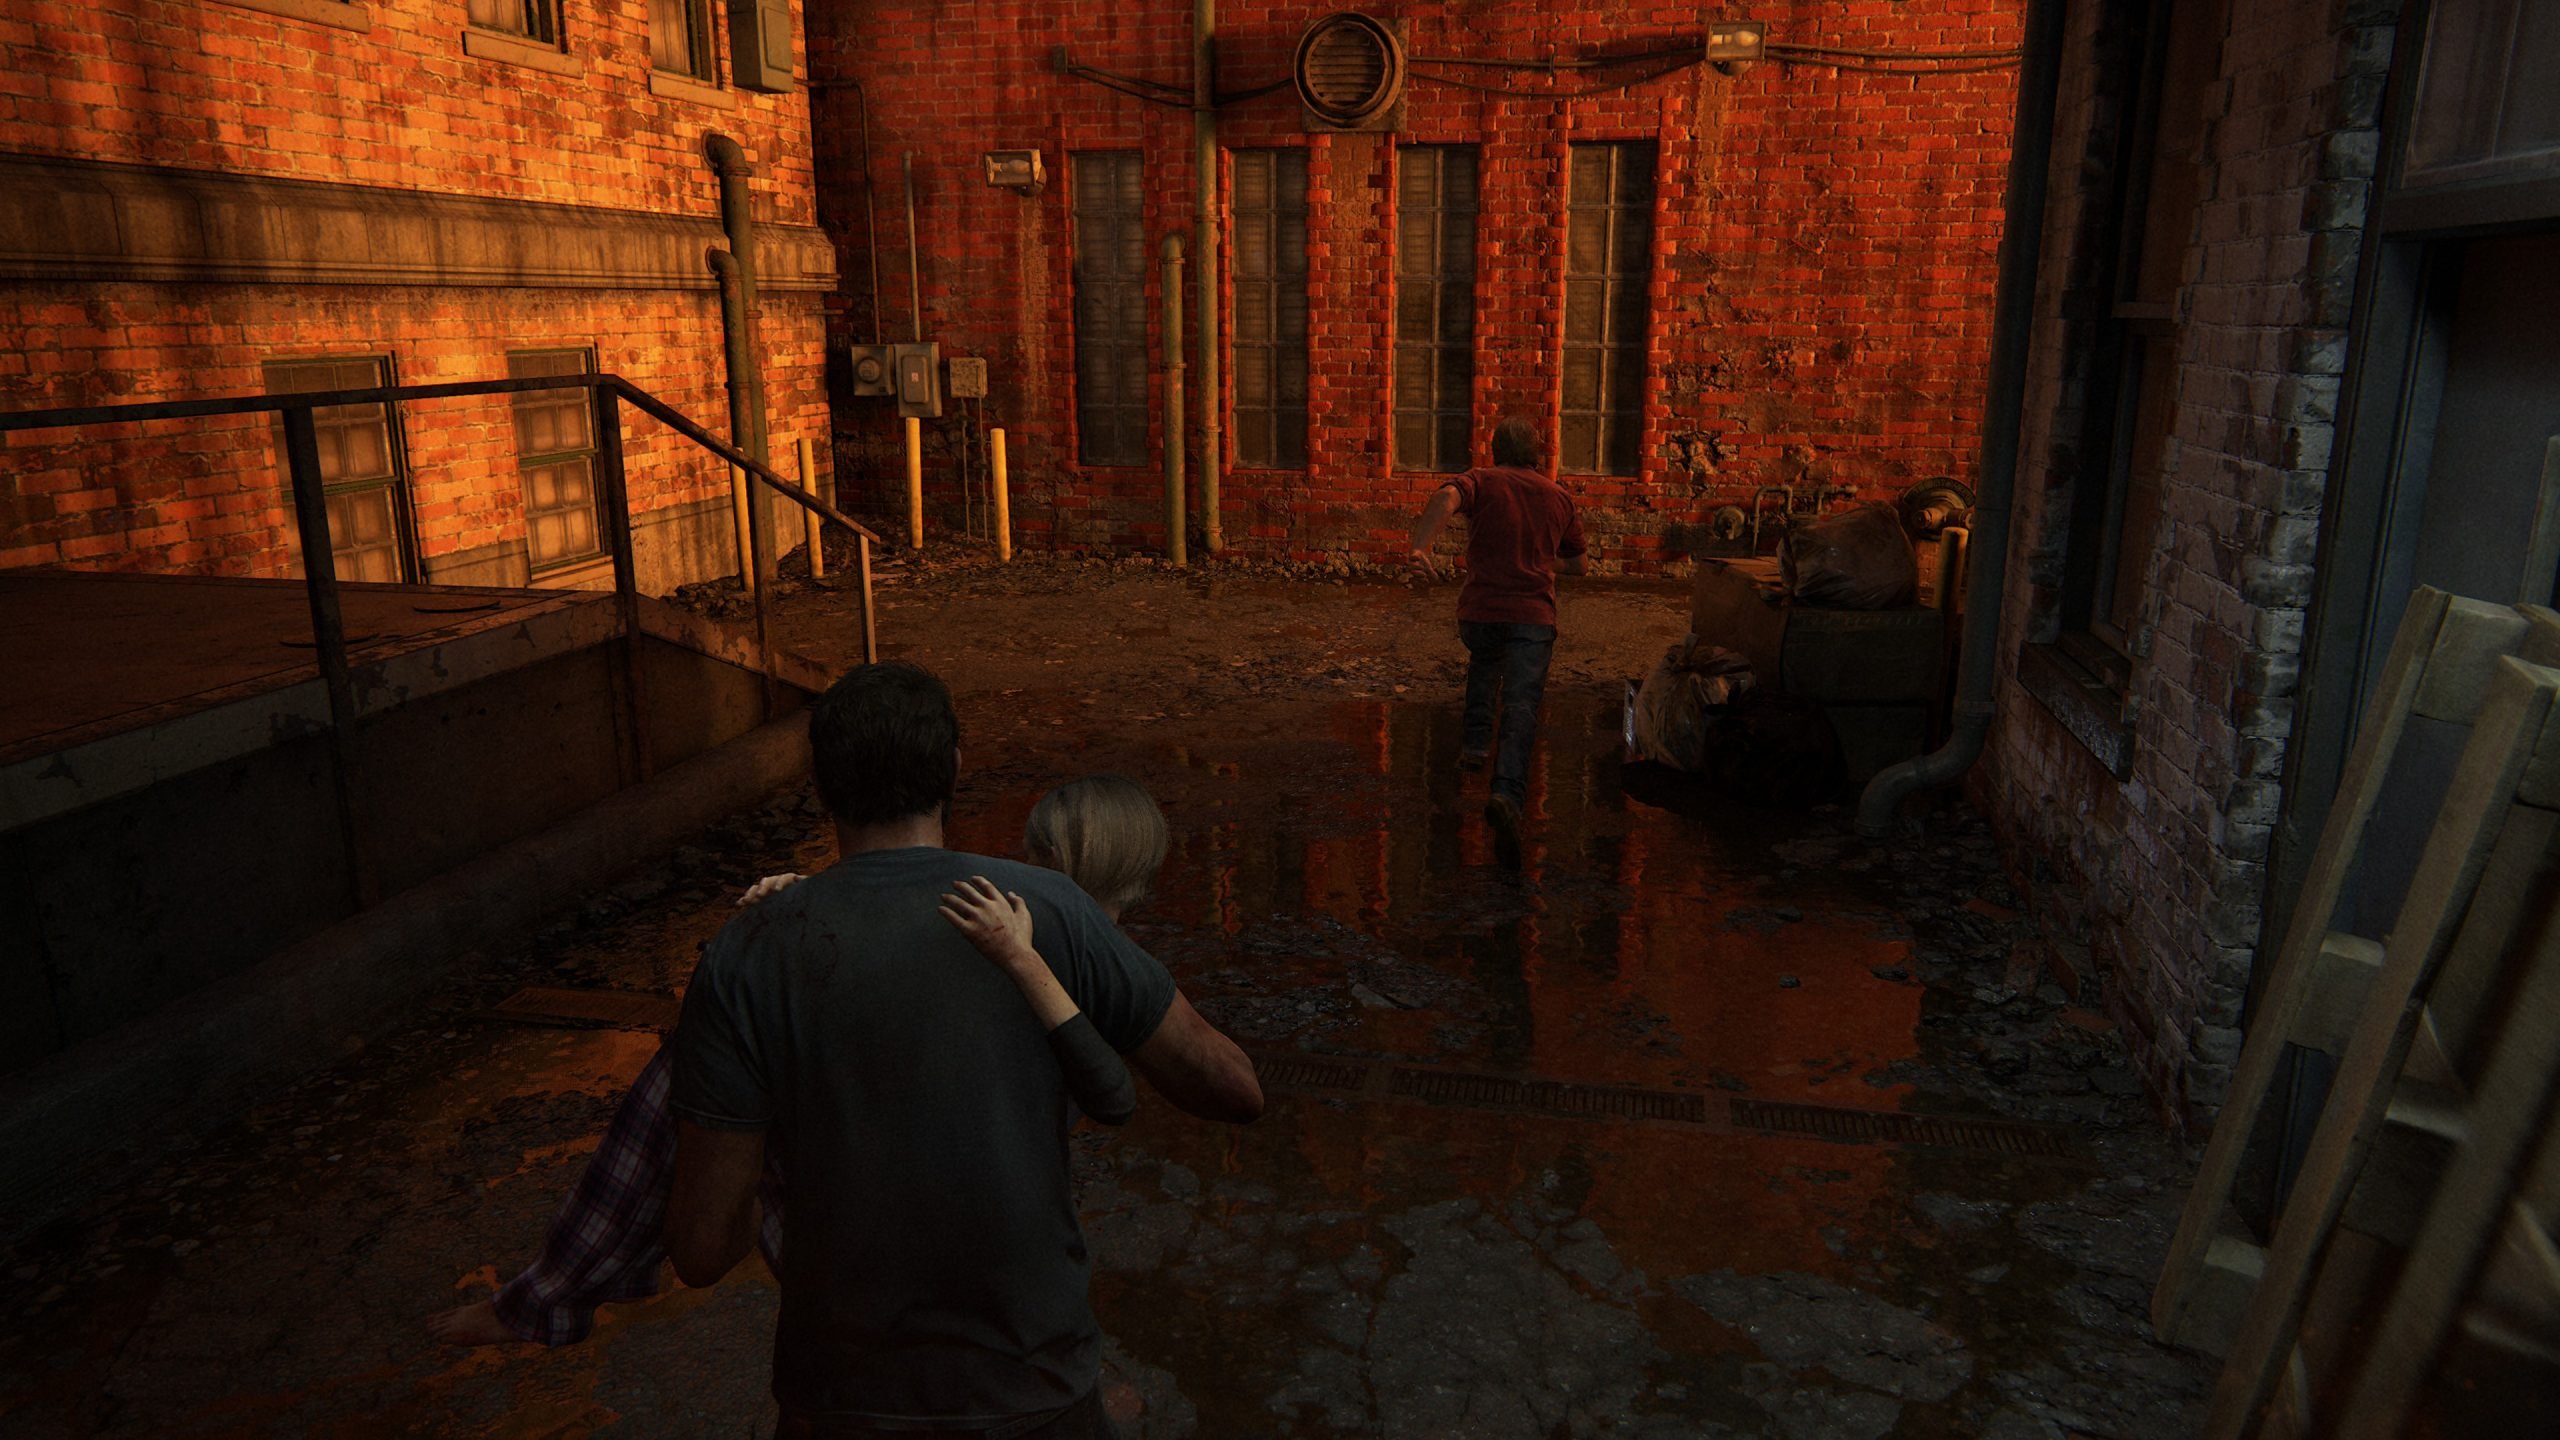 The Last of Us PC